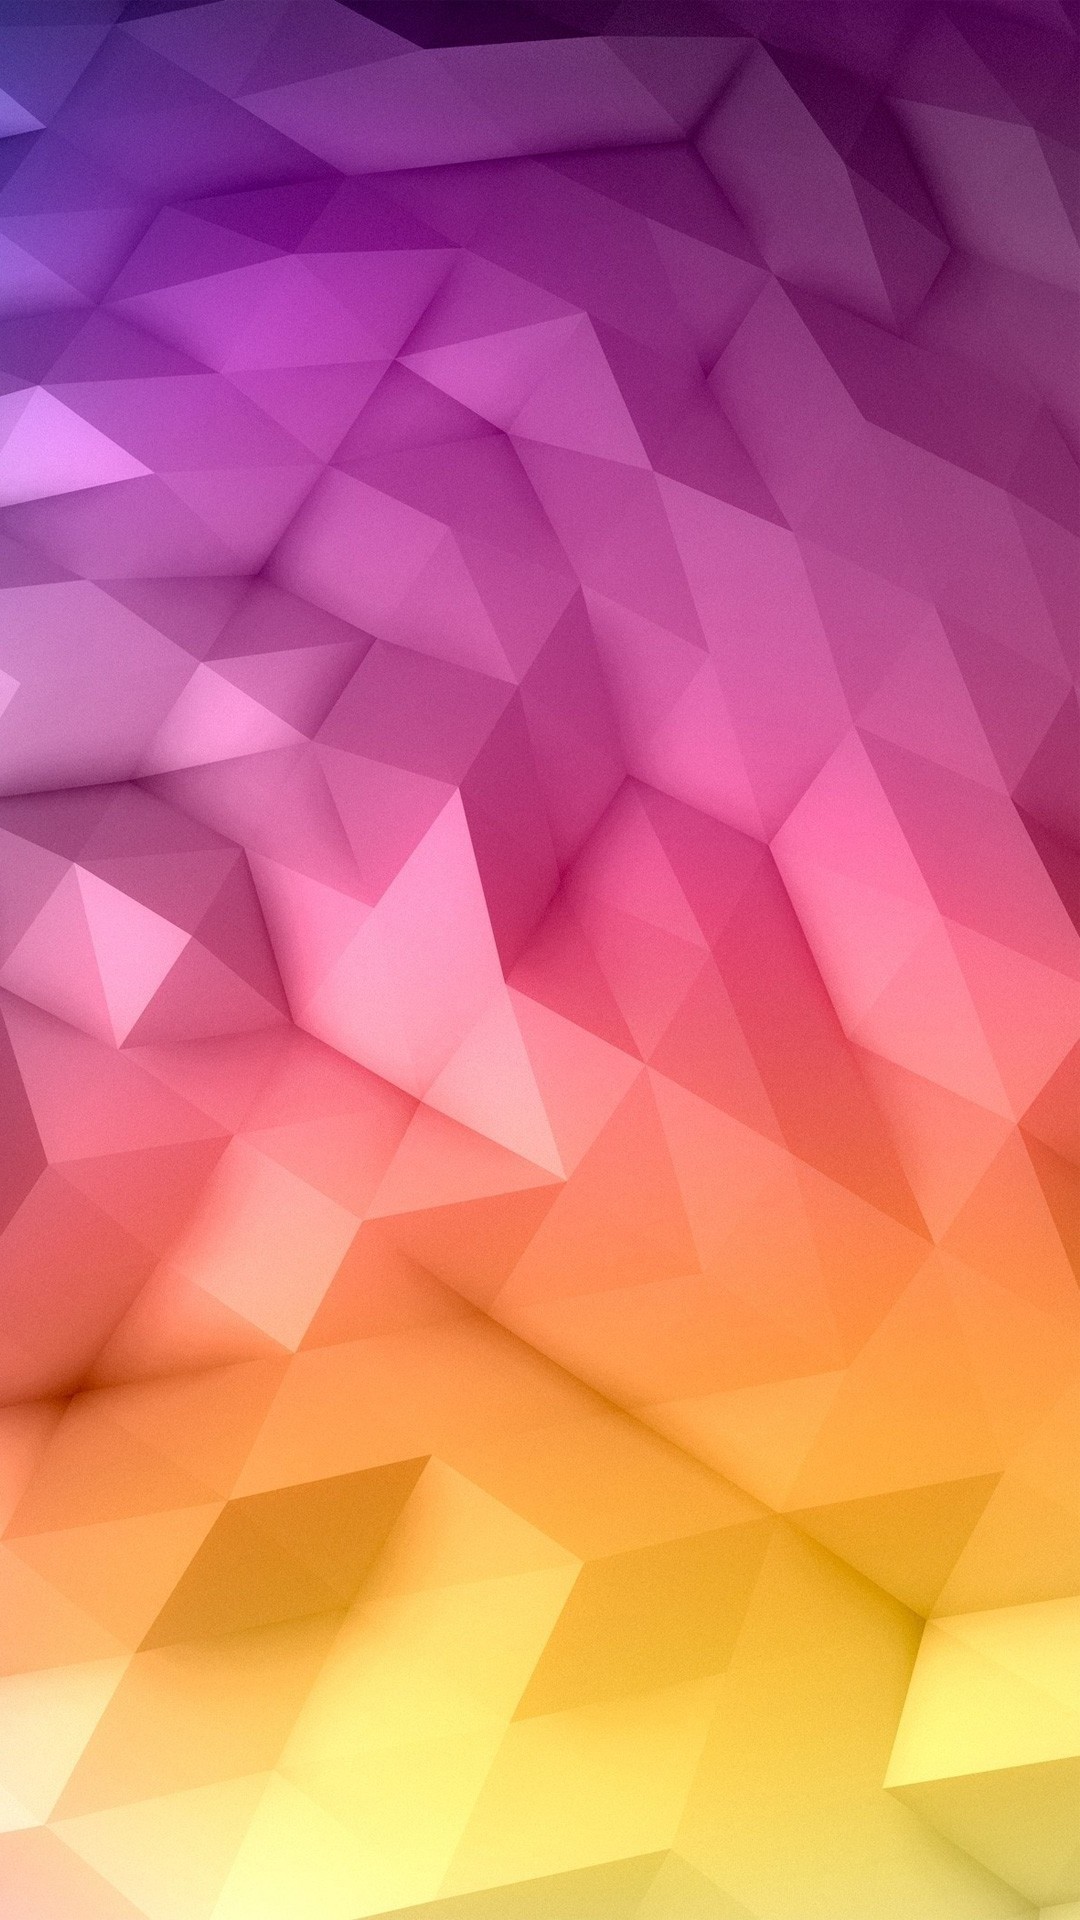 1080x1920 ... Gradient polygon Abstract mobile wallpaper